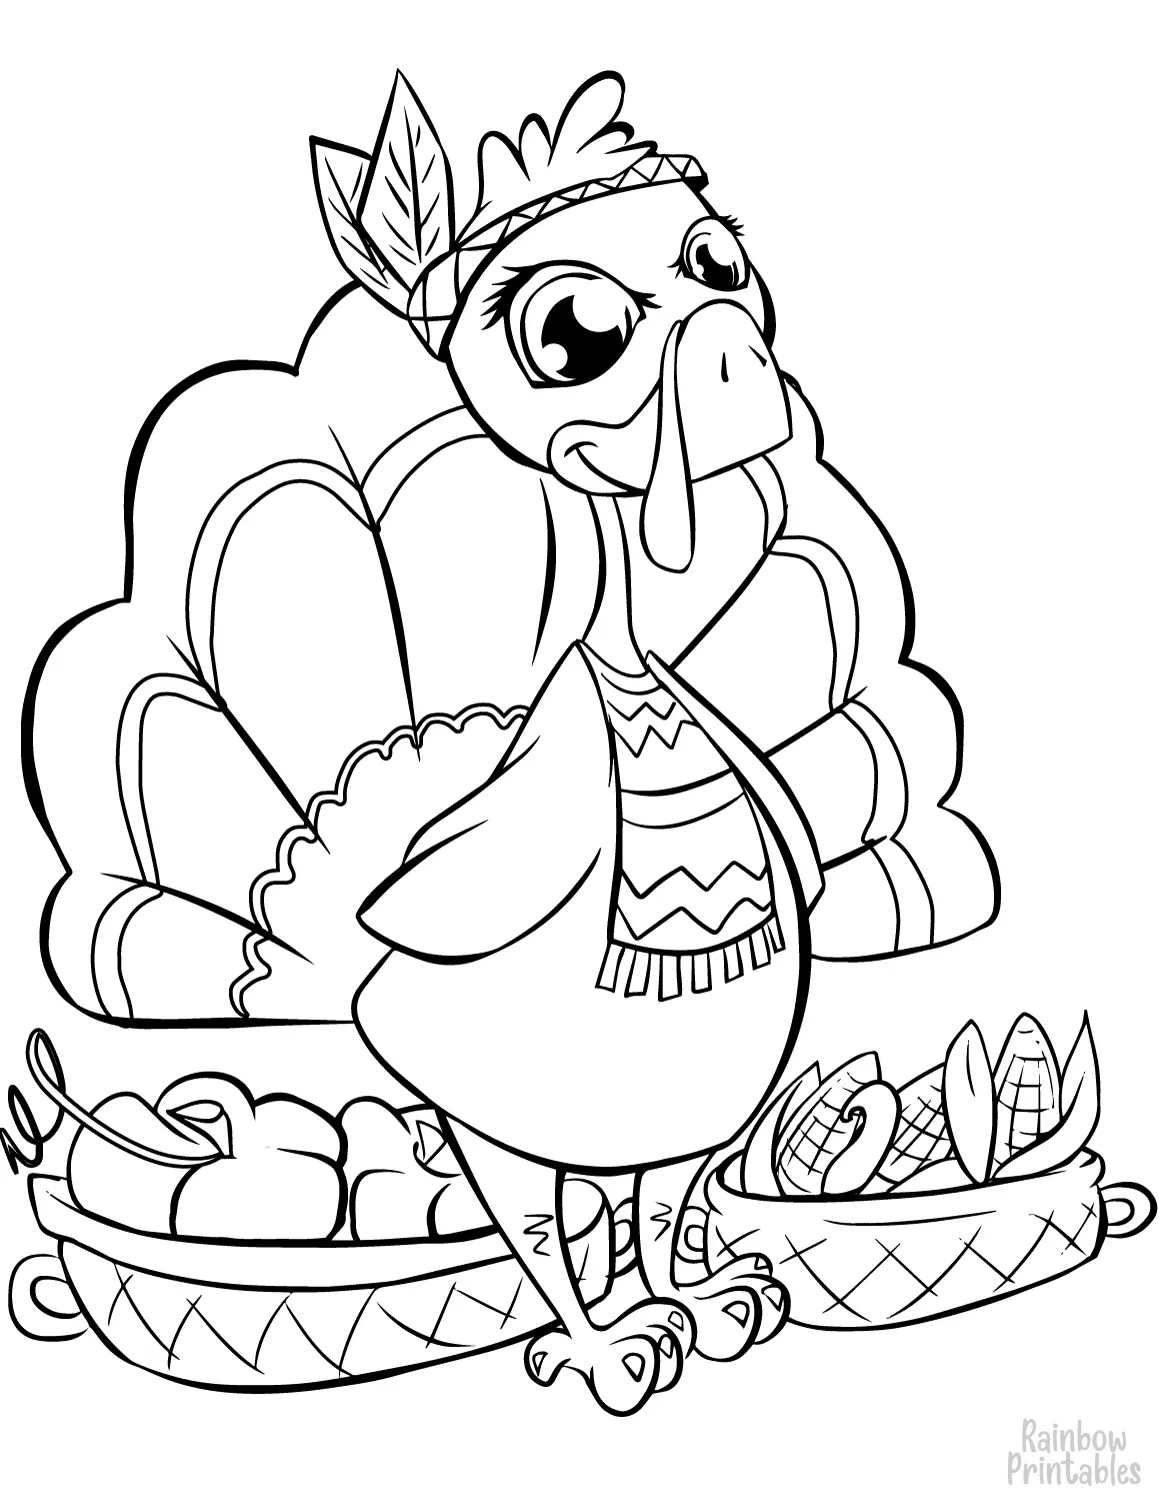 BASKET CARTOON CUTE INDIAN TURKEY ANIMAL Clipart Coloring Pages for Kids Adults Art Activities Line Art